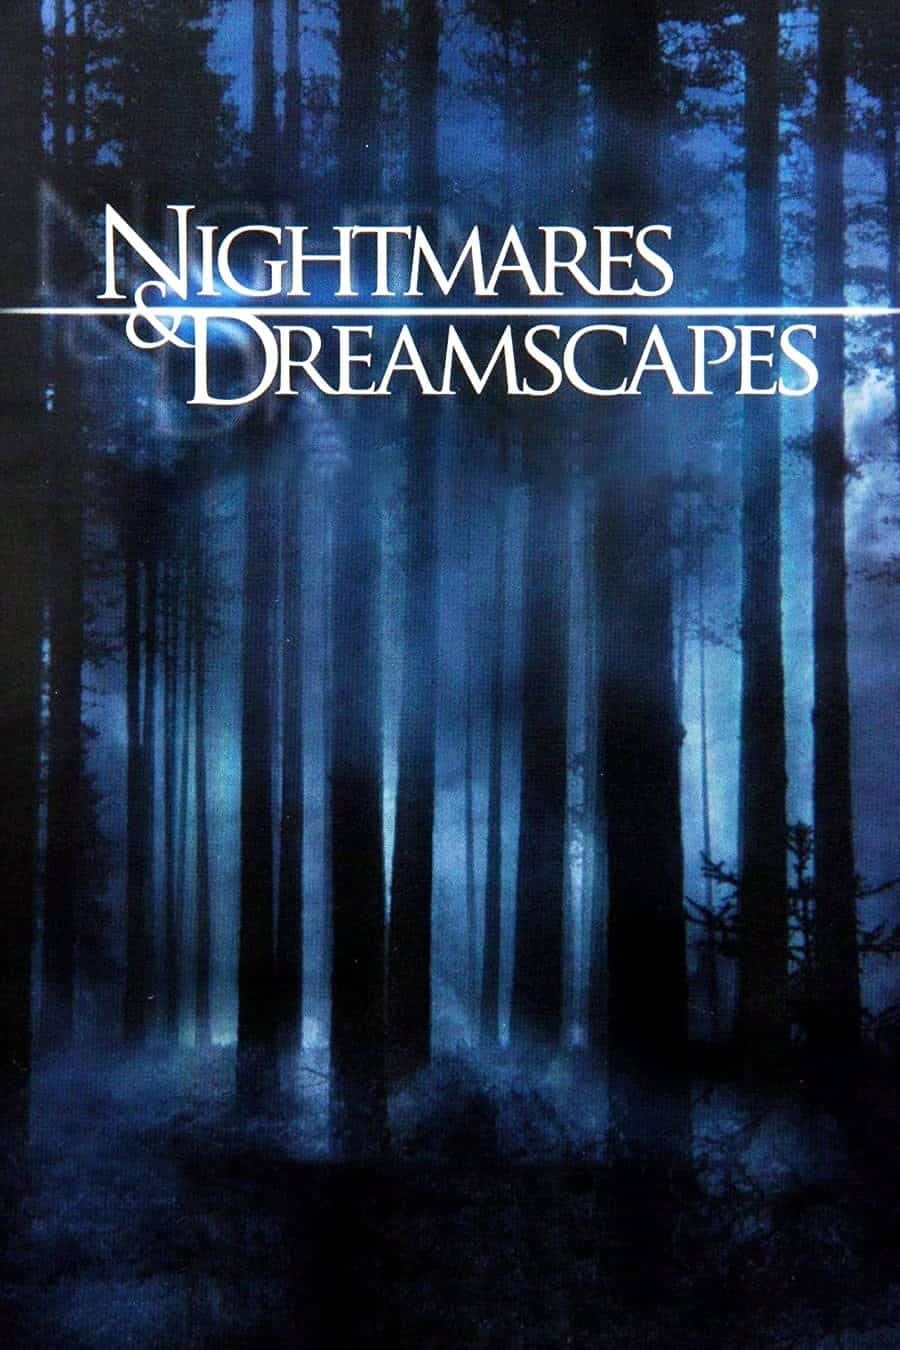 Nightmares and Dreamscapes From the Stories of Stephen King